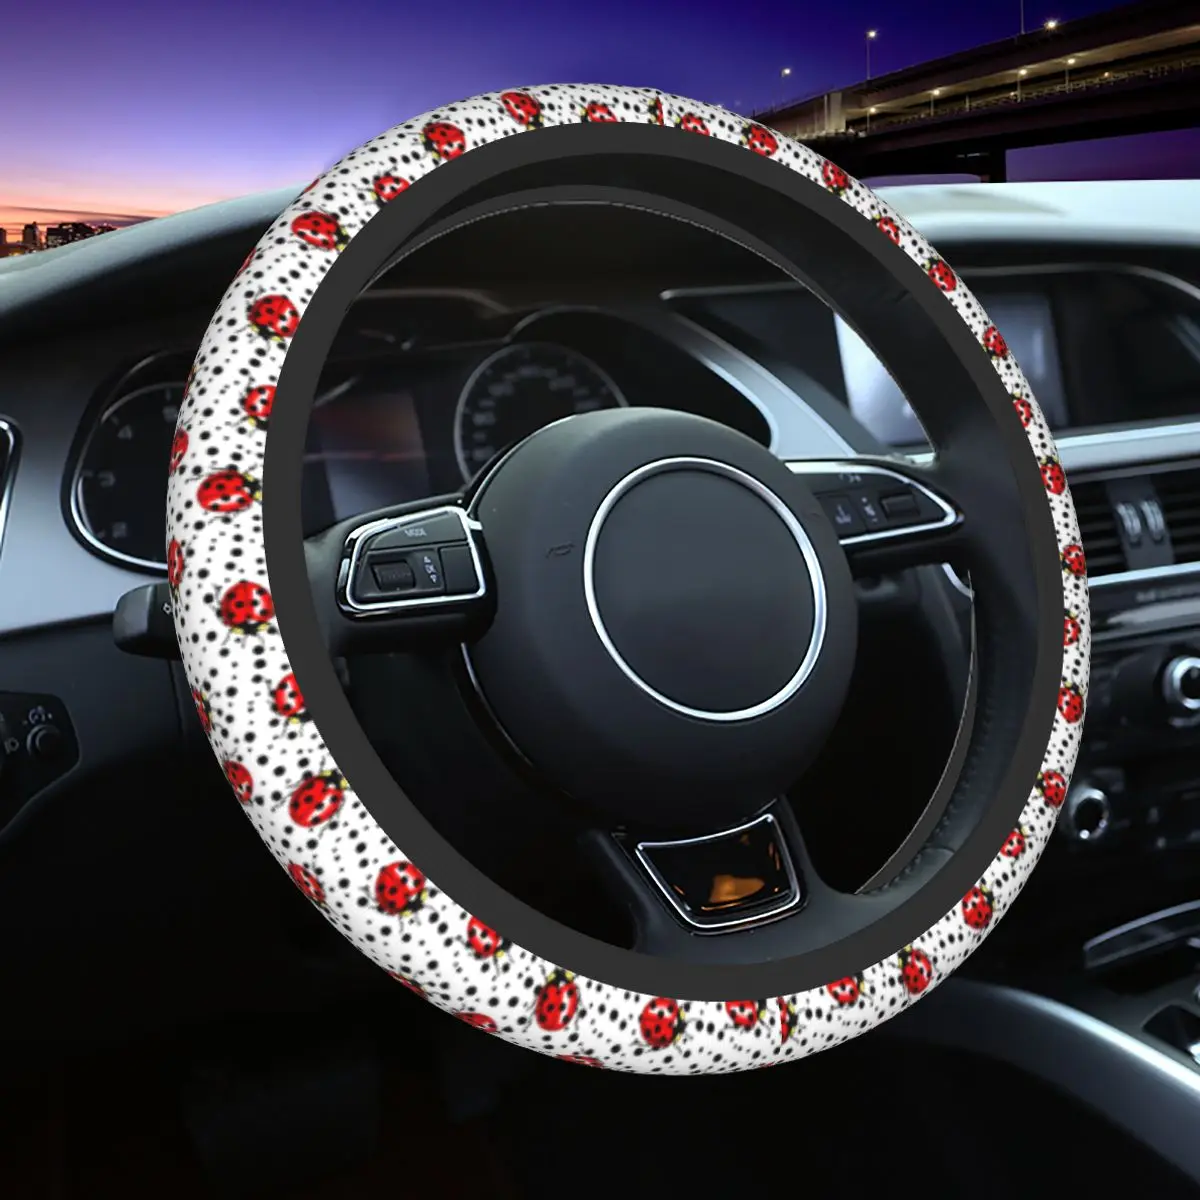 

Ladybug Ladybird Car Steering Wheel Cover 38cm Anti-slip Insect Lover Steering Wheel Protective Cover Auto Interior Accessories